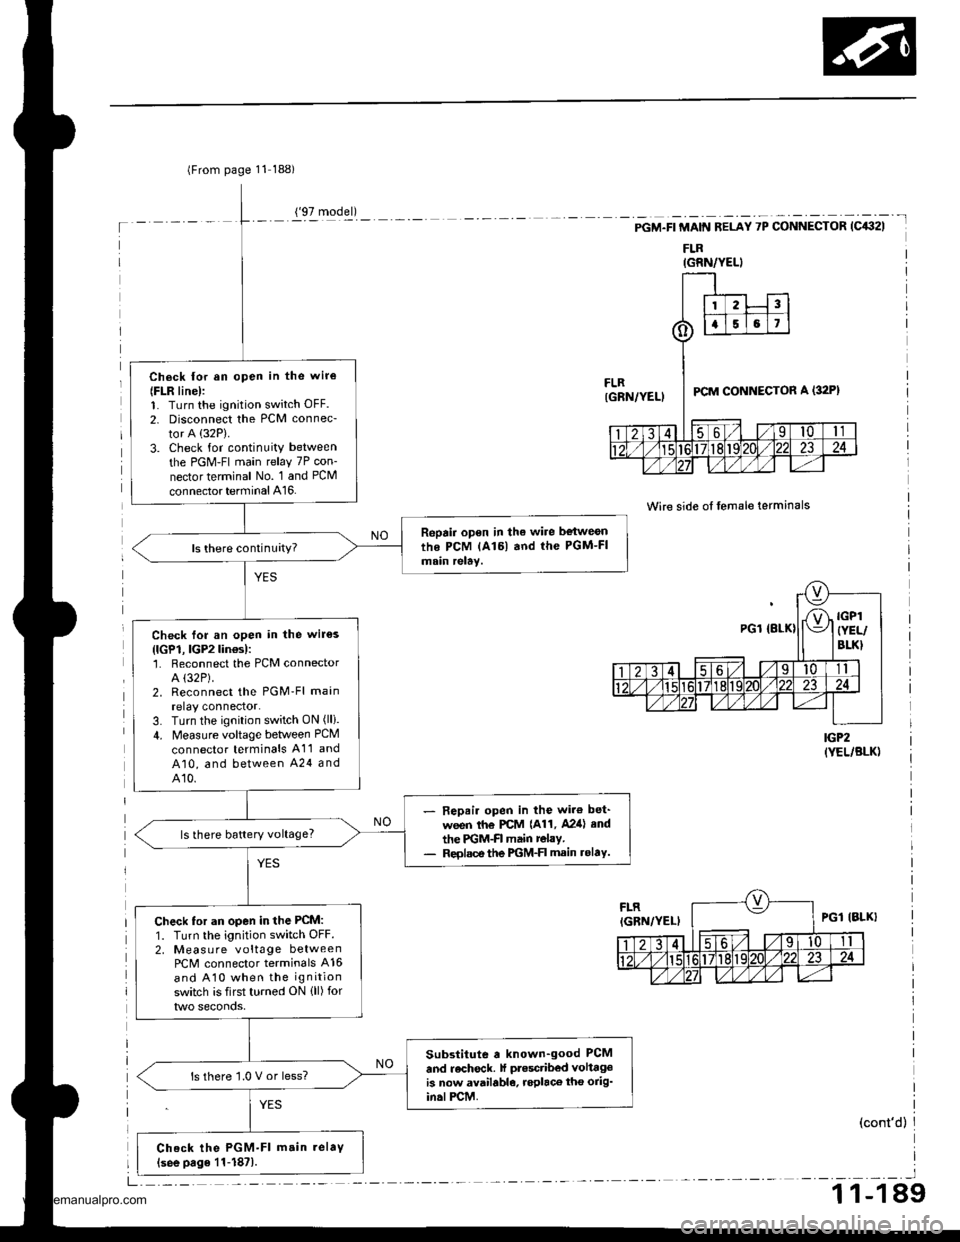 HONDA CR-V 2000 RD1-RD3 / 1.G Service Manual 
lFrom page 11 188)
Ch6ck lor an open in the wir€
{FLR line):1. Turn the ignition switch OFF.
2. Disconnect the PCM connec-
tor A (32P).
3. Check for continuity between
the PGM-FI main relay 7P con-